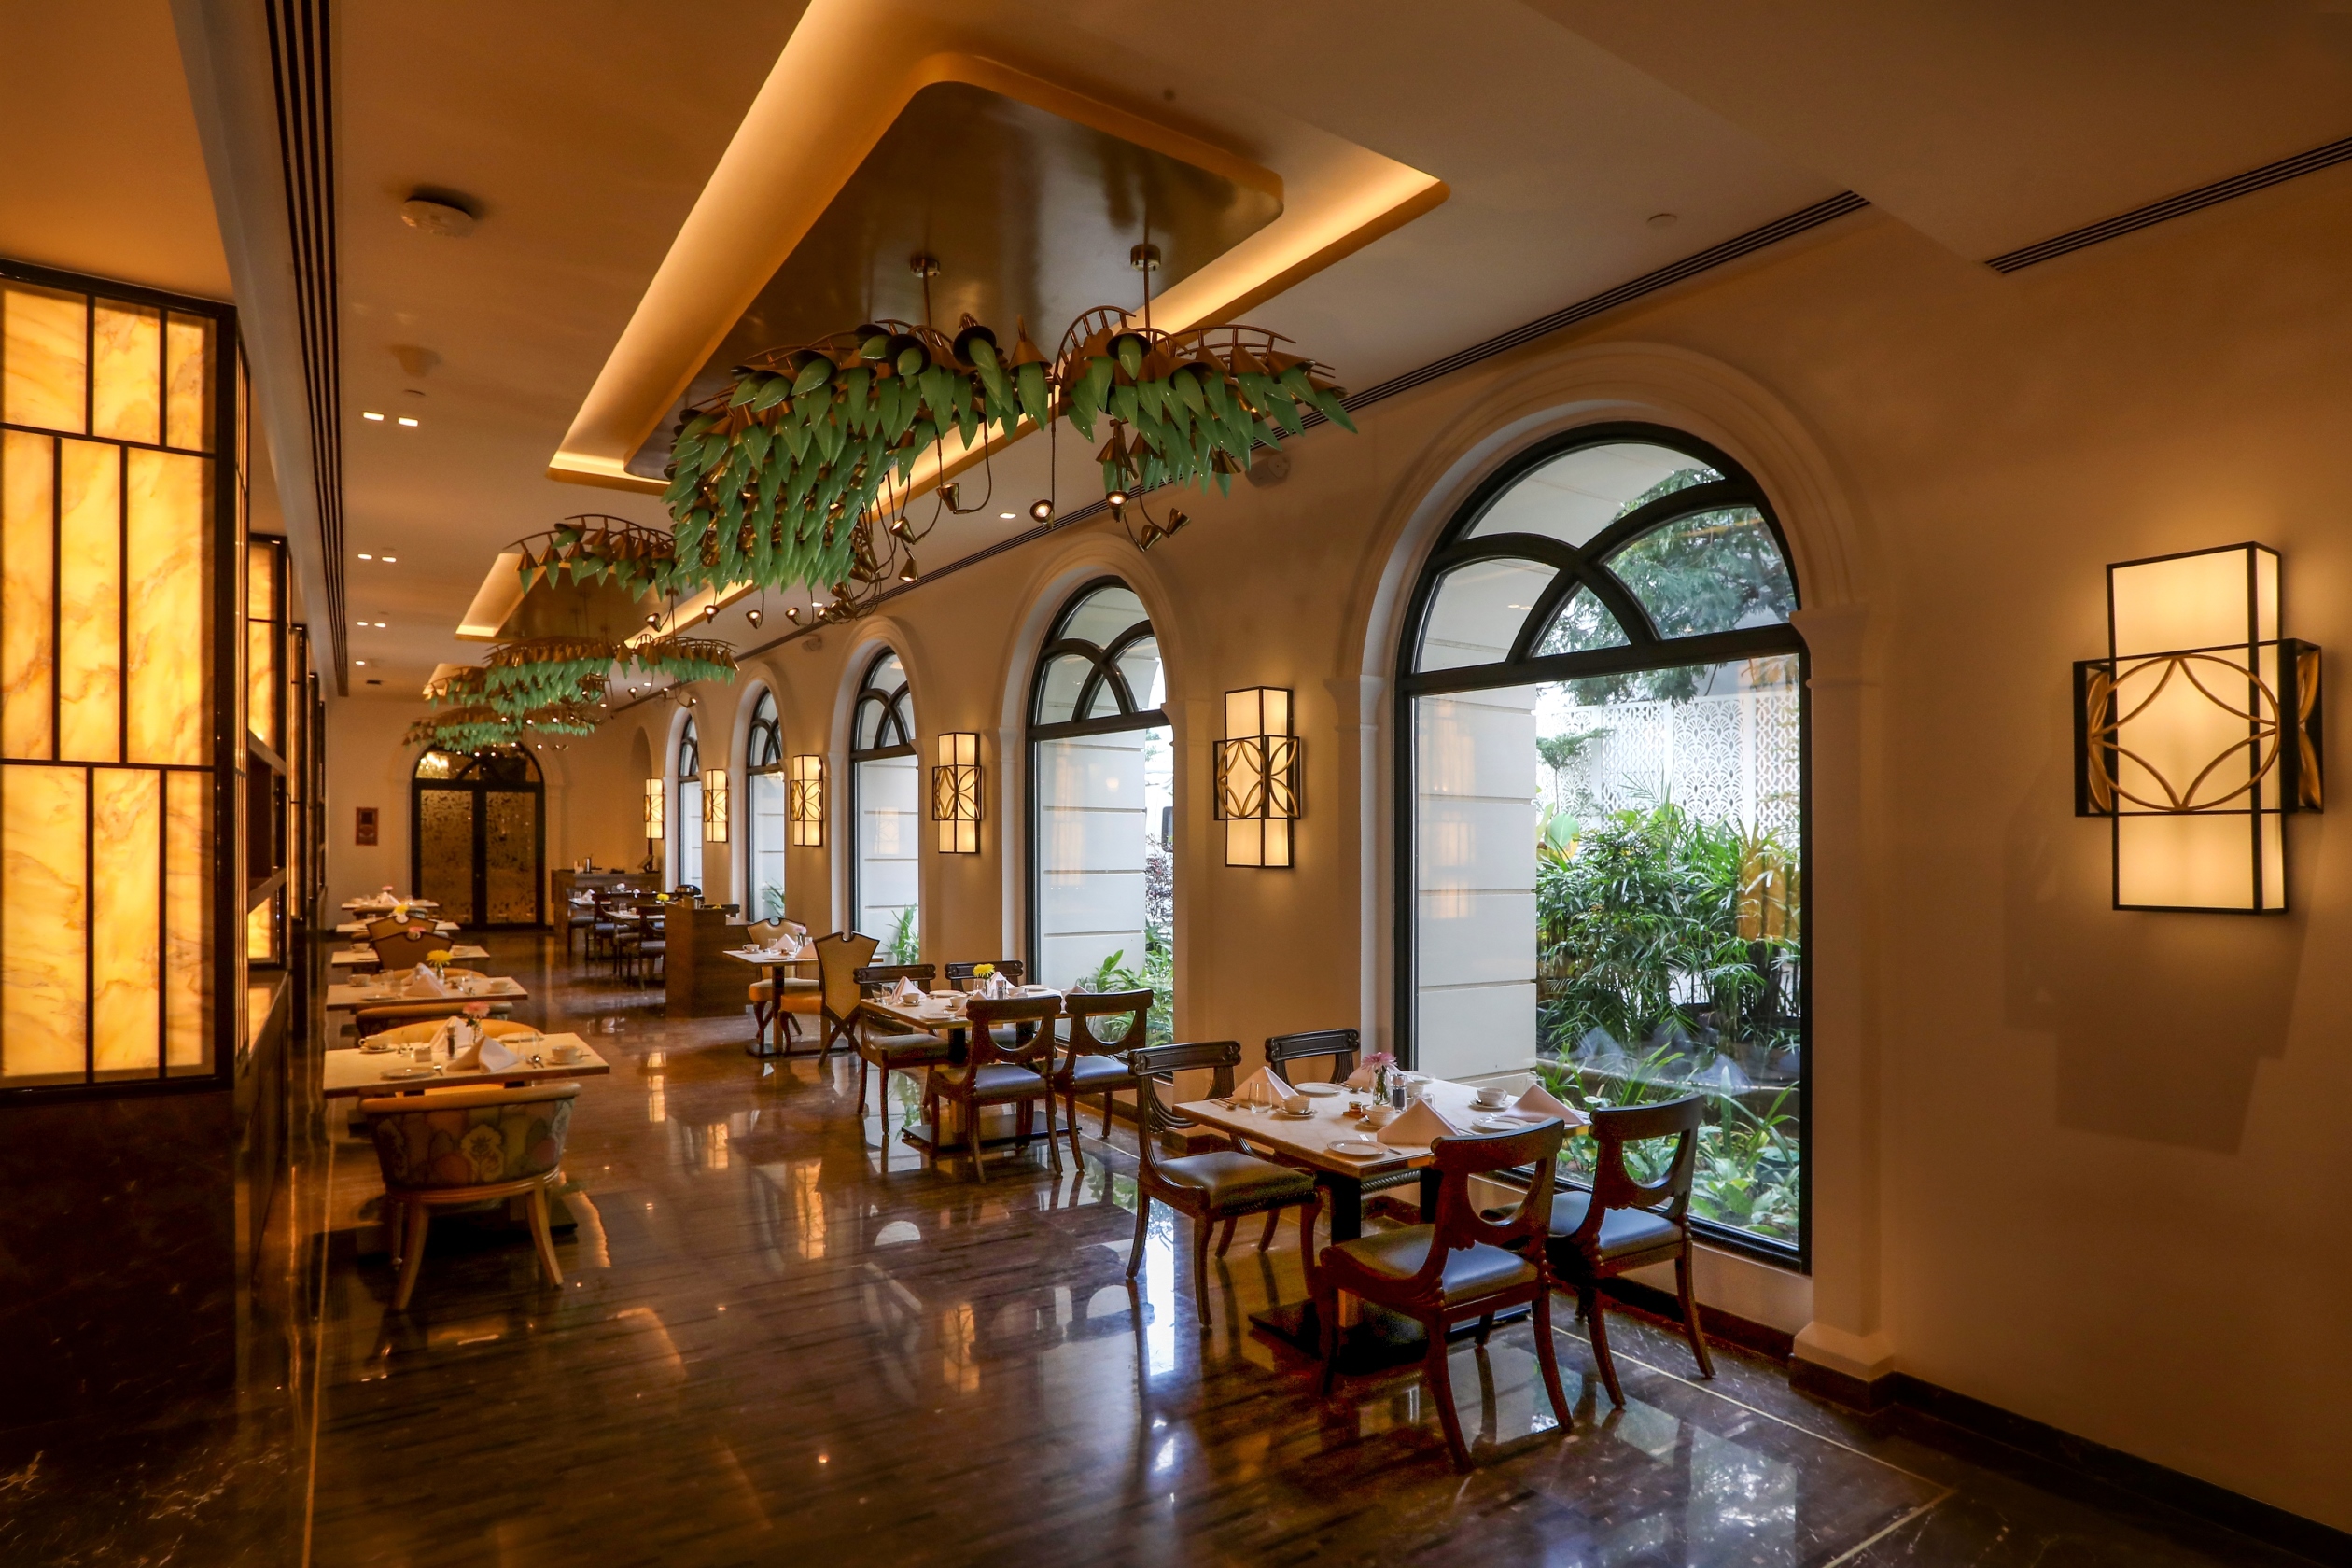 Radisson Blu Hotel GRT Chennai launches Ministry of Chutneys the First Anglo-Indian Cuisine Restaurant in South India